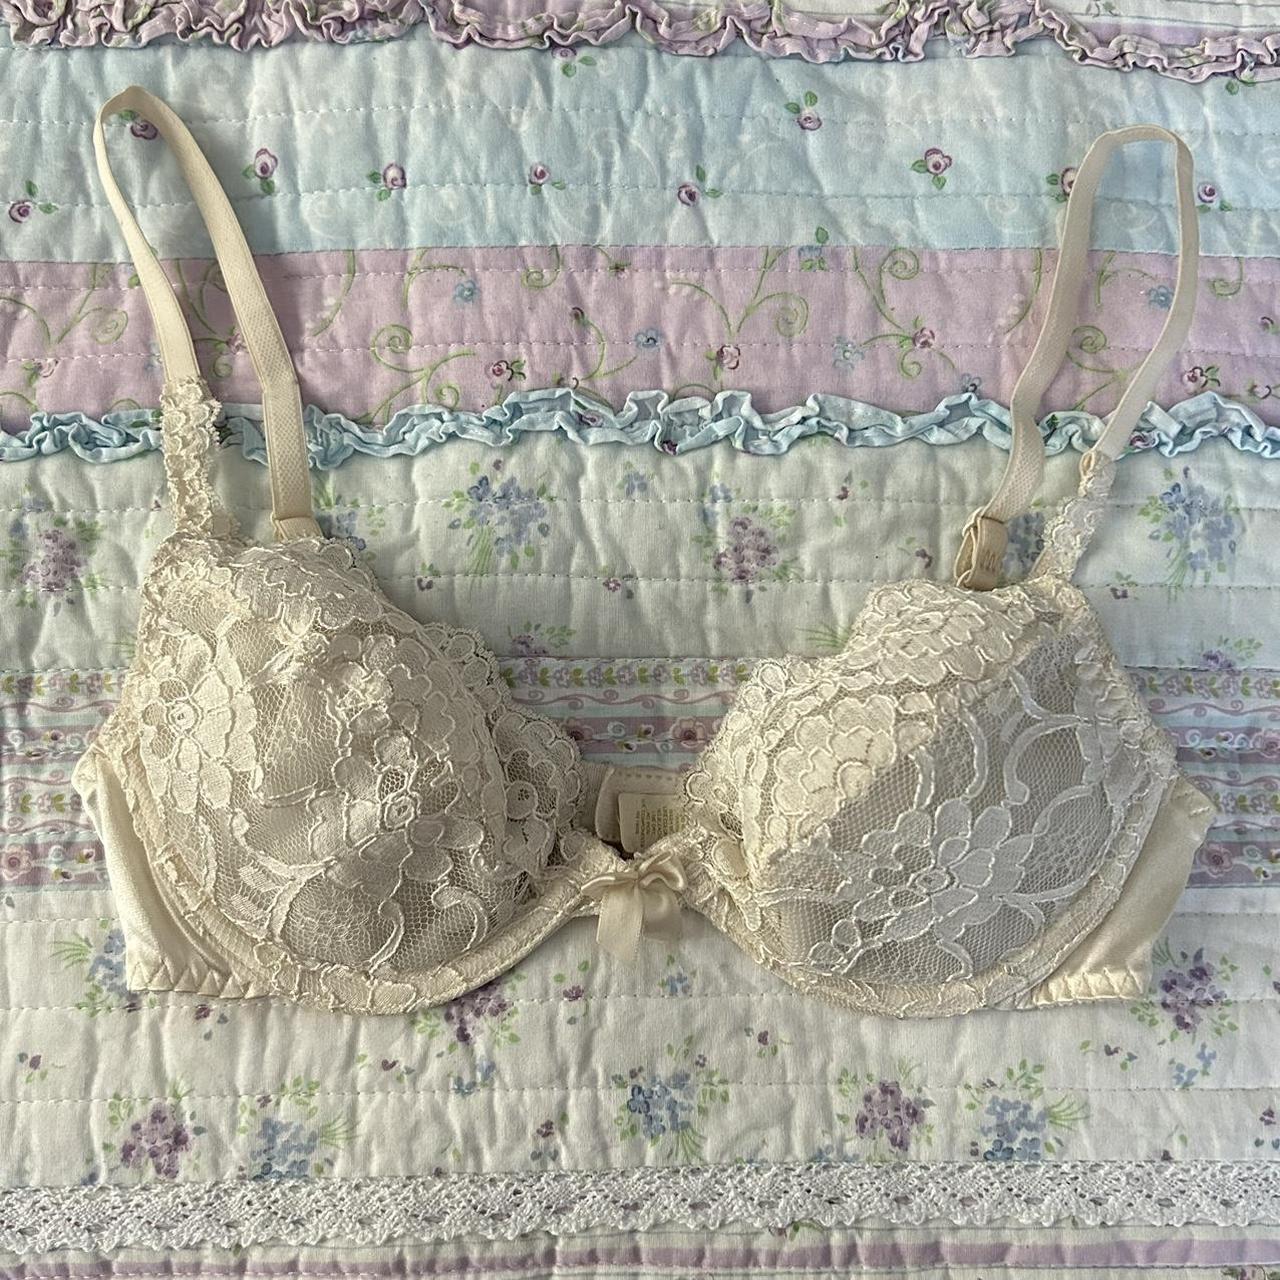 The prettiest yamamay bra with beautiful lace detail - Depop